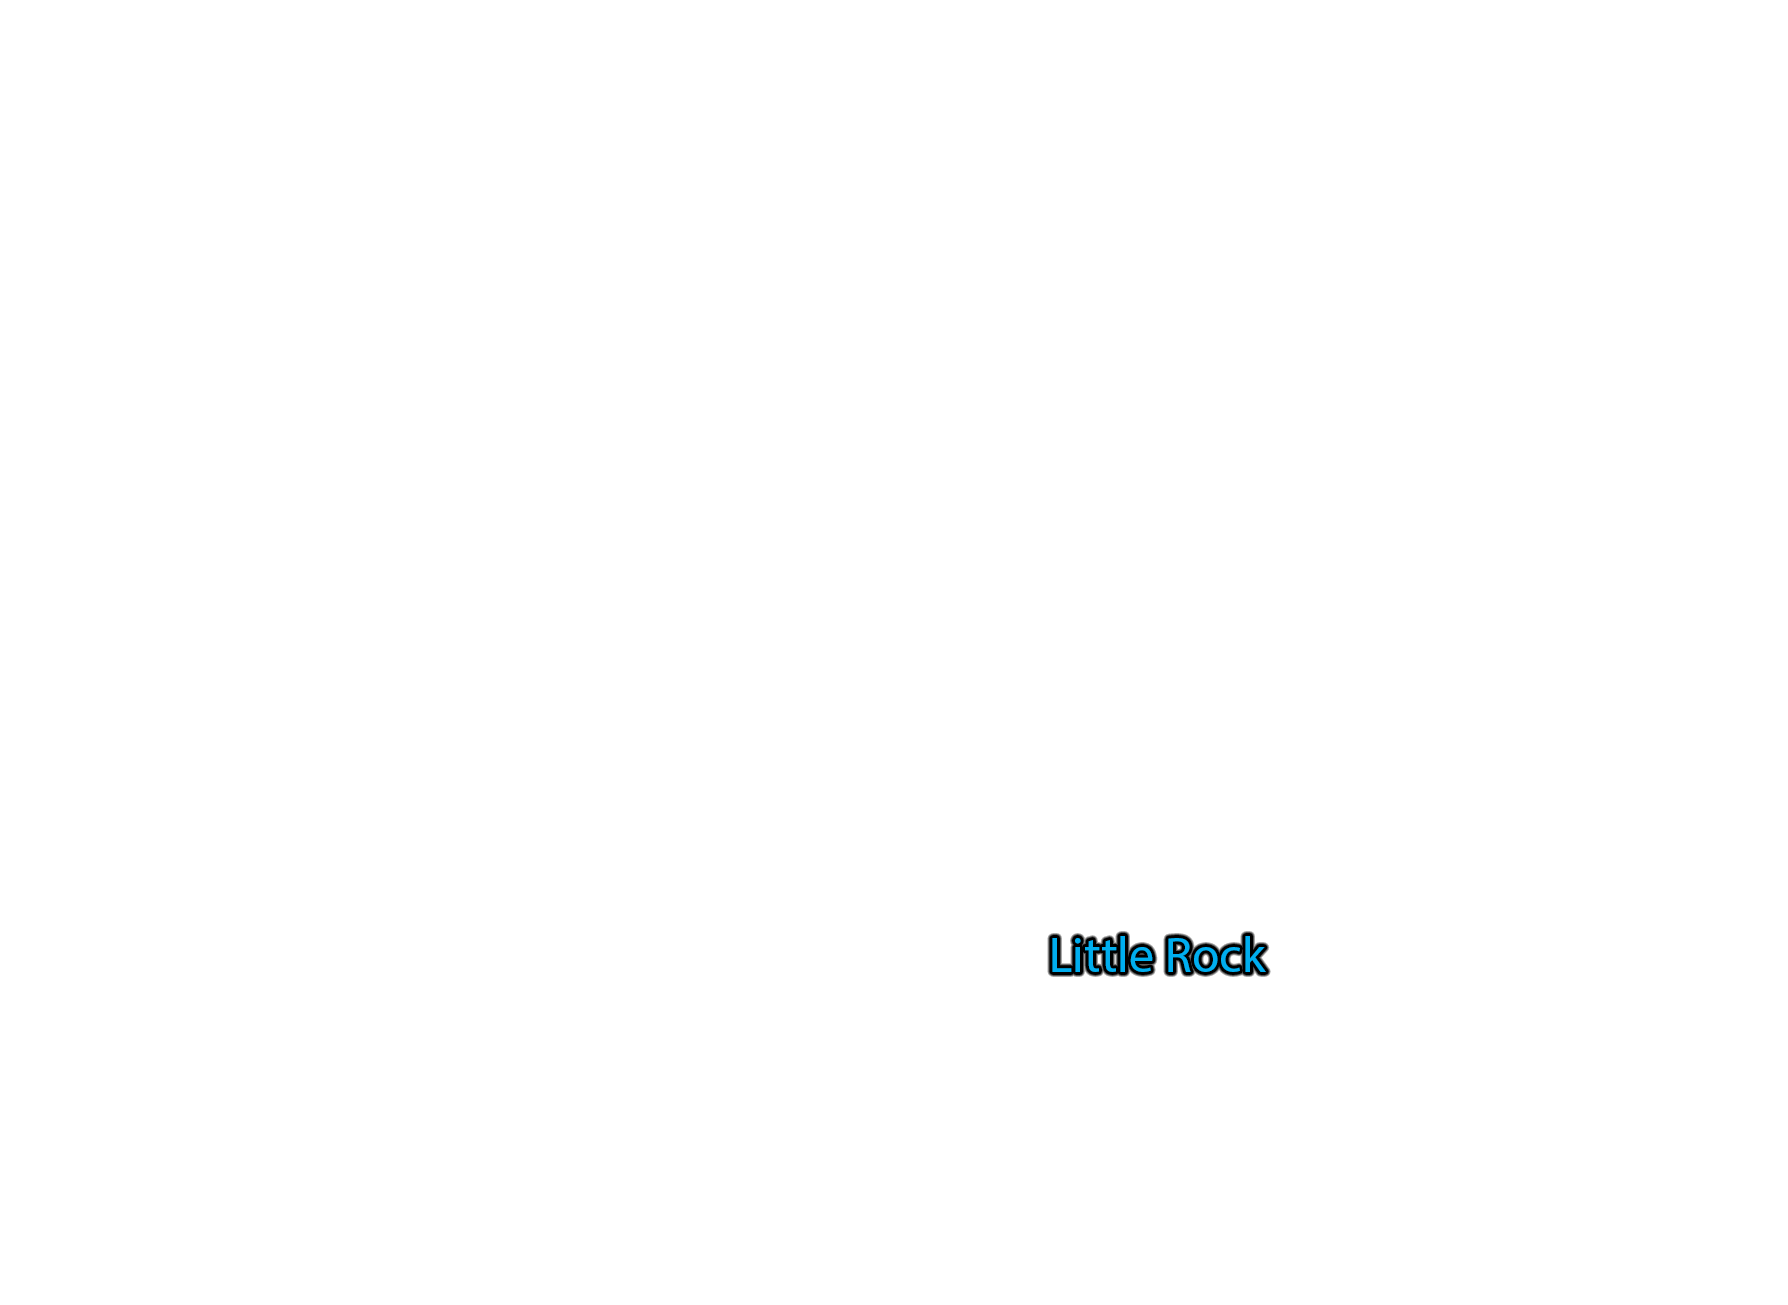 Little-Rock label with glow